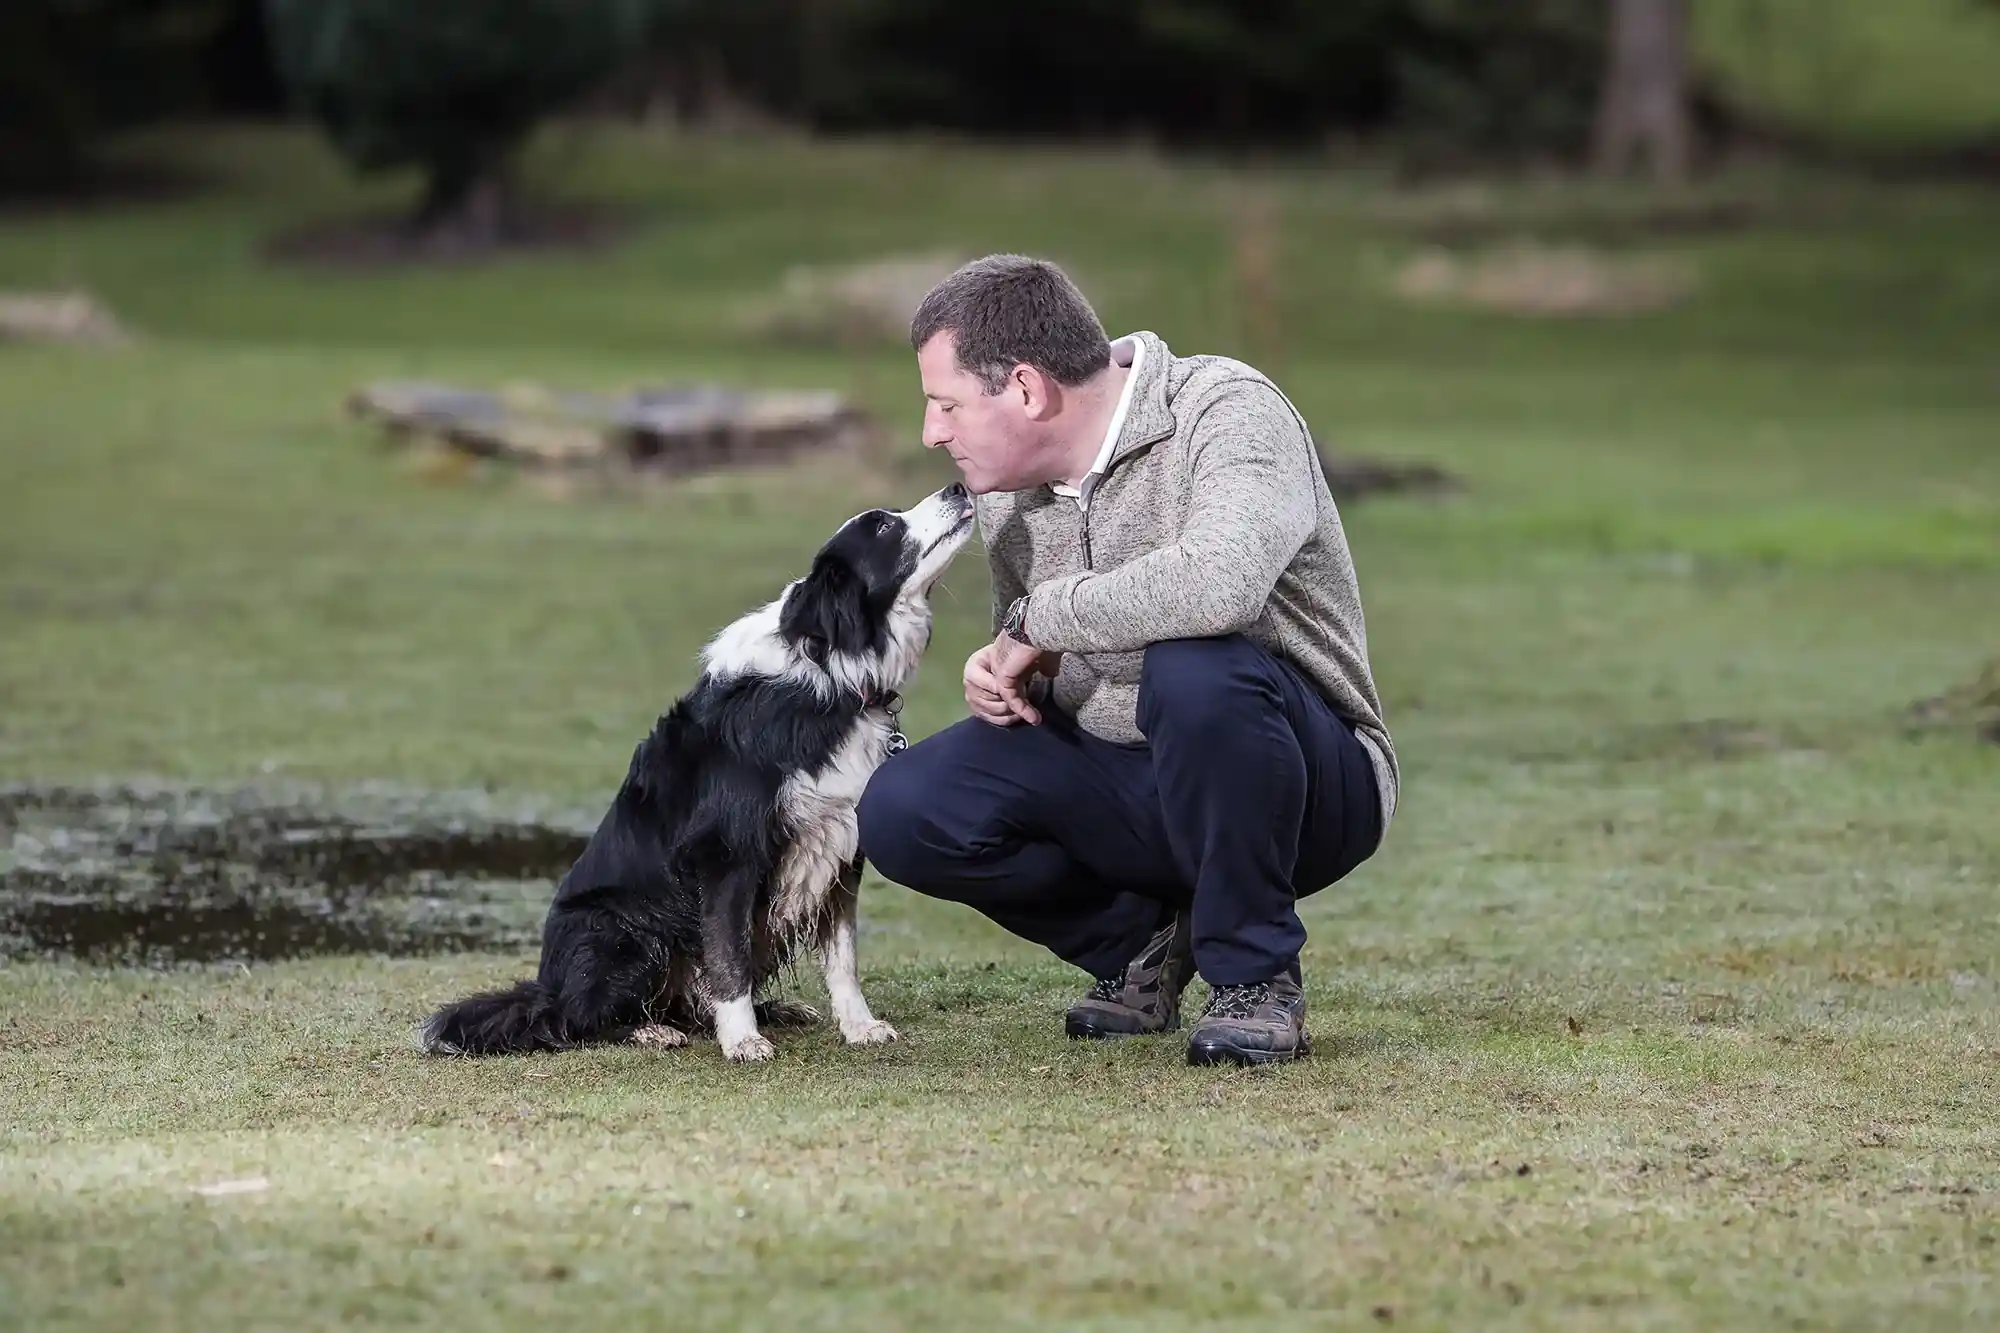 A man in a sweater and dark pants squats on a grassy field, touching noses with a black and white dog.